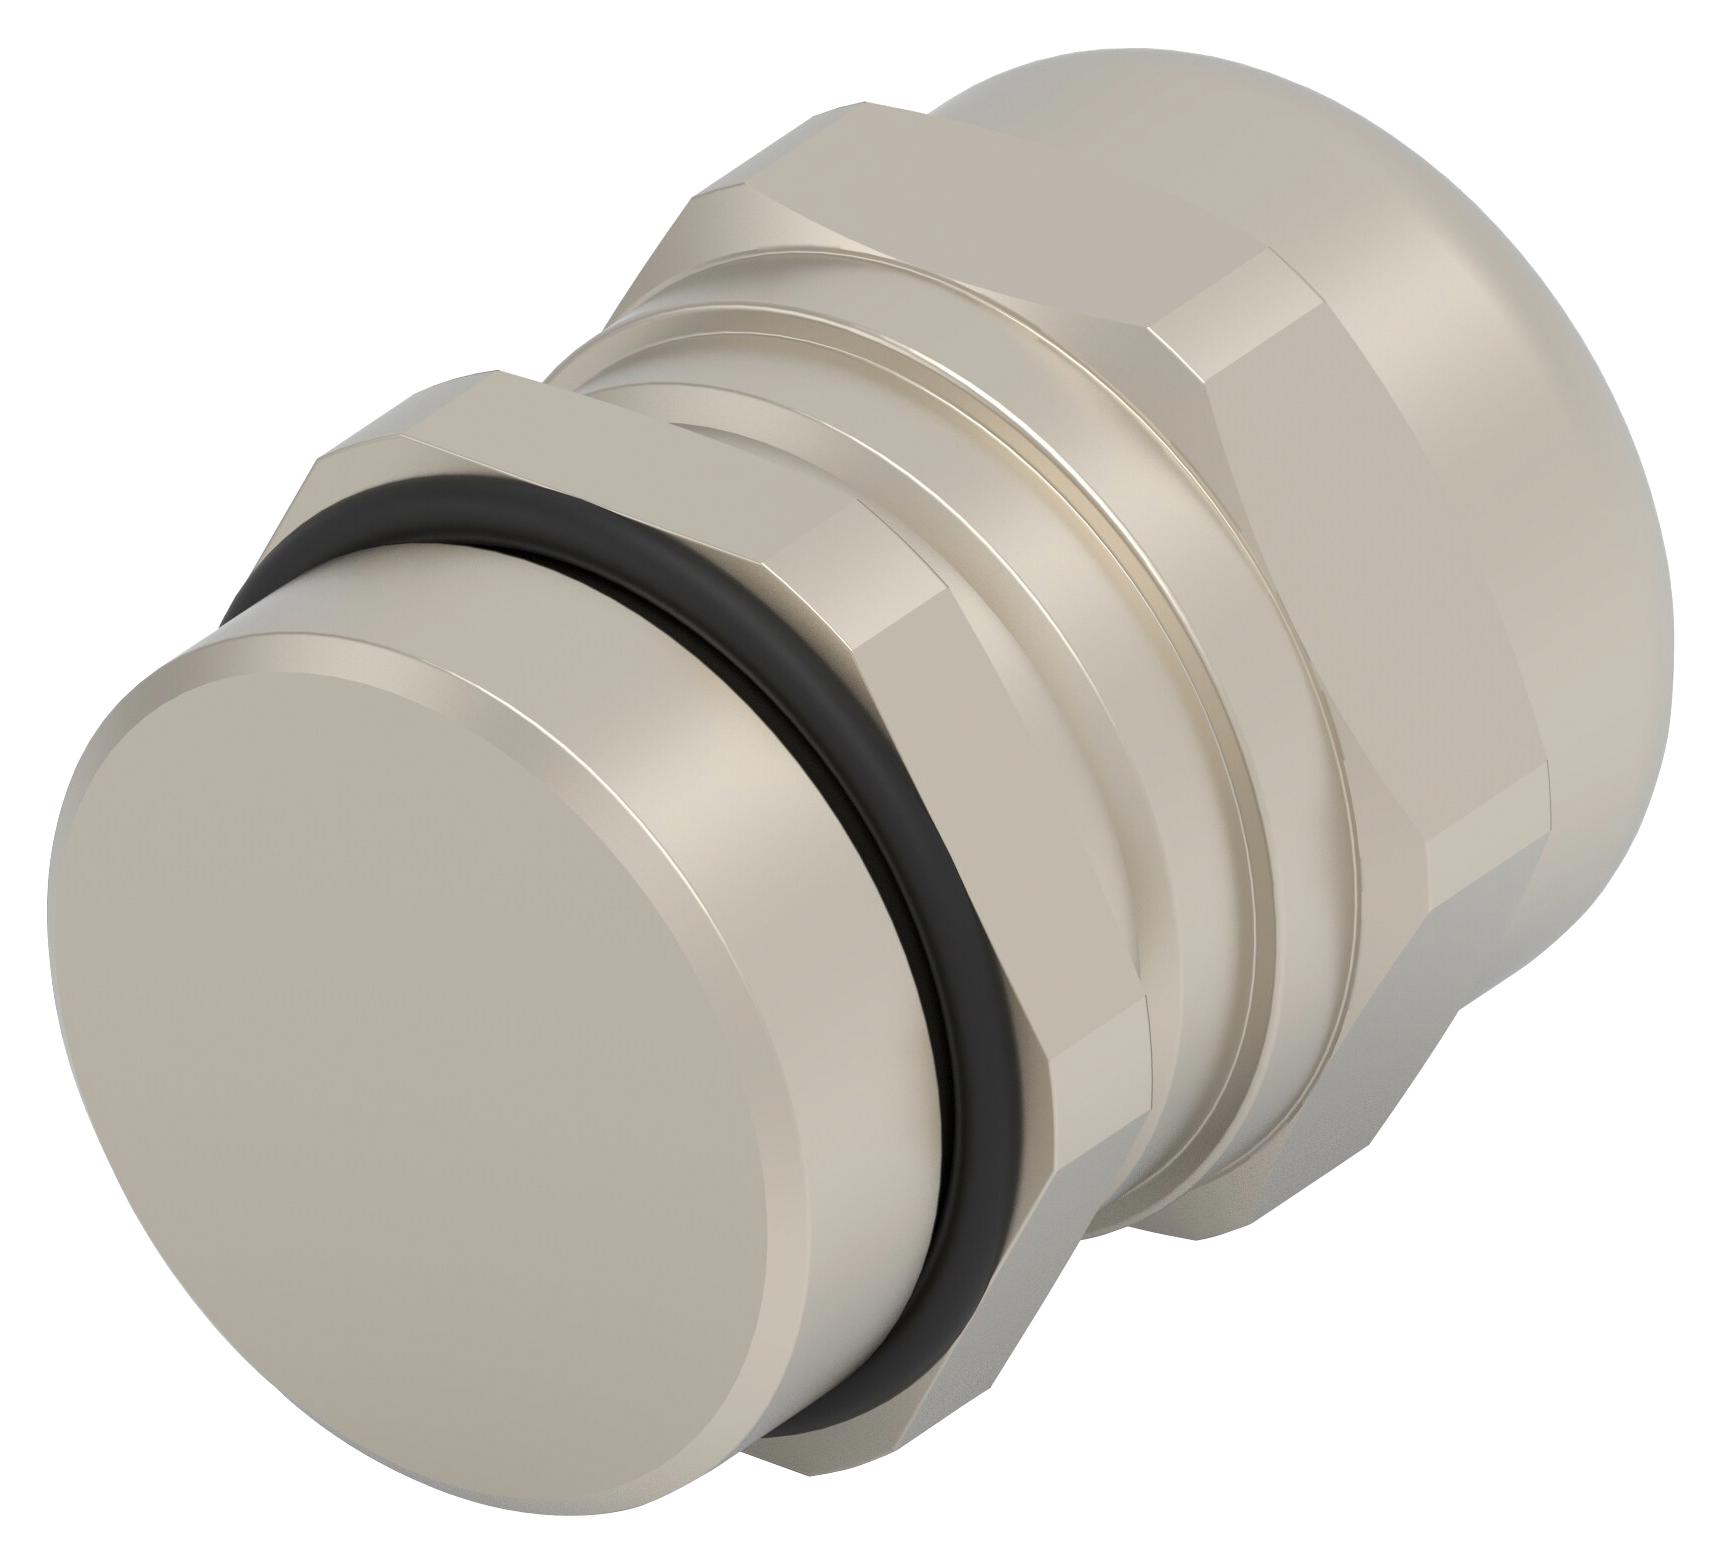 Entrelec TE Connectivity 1Sng625068R0000 Cable Gland, Pg13.5, 6mm-12mm, Ip66/ip68